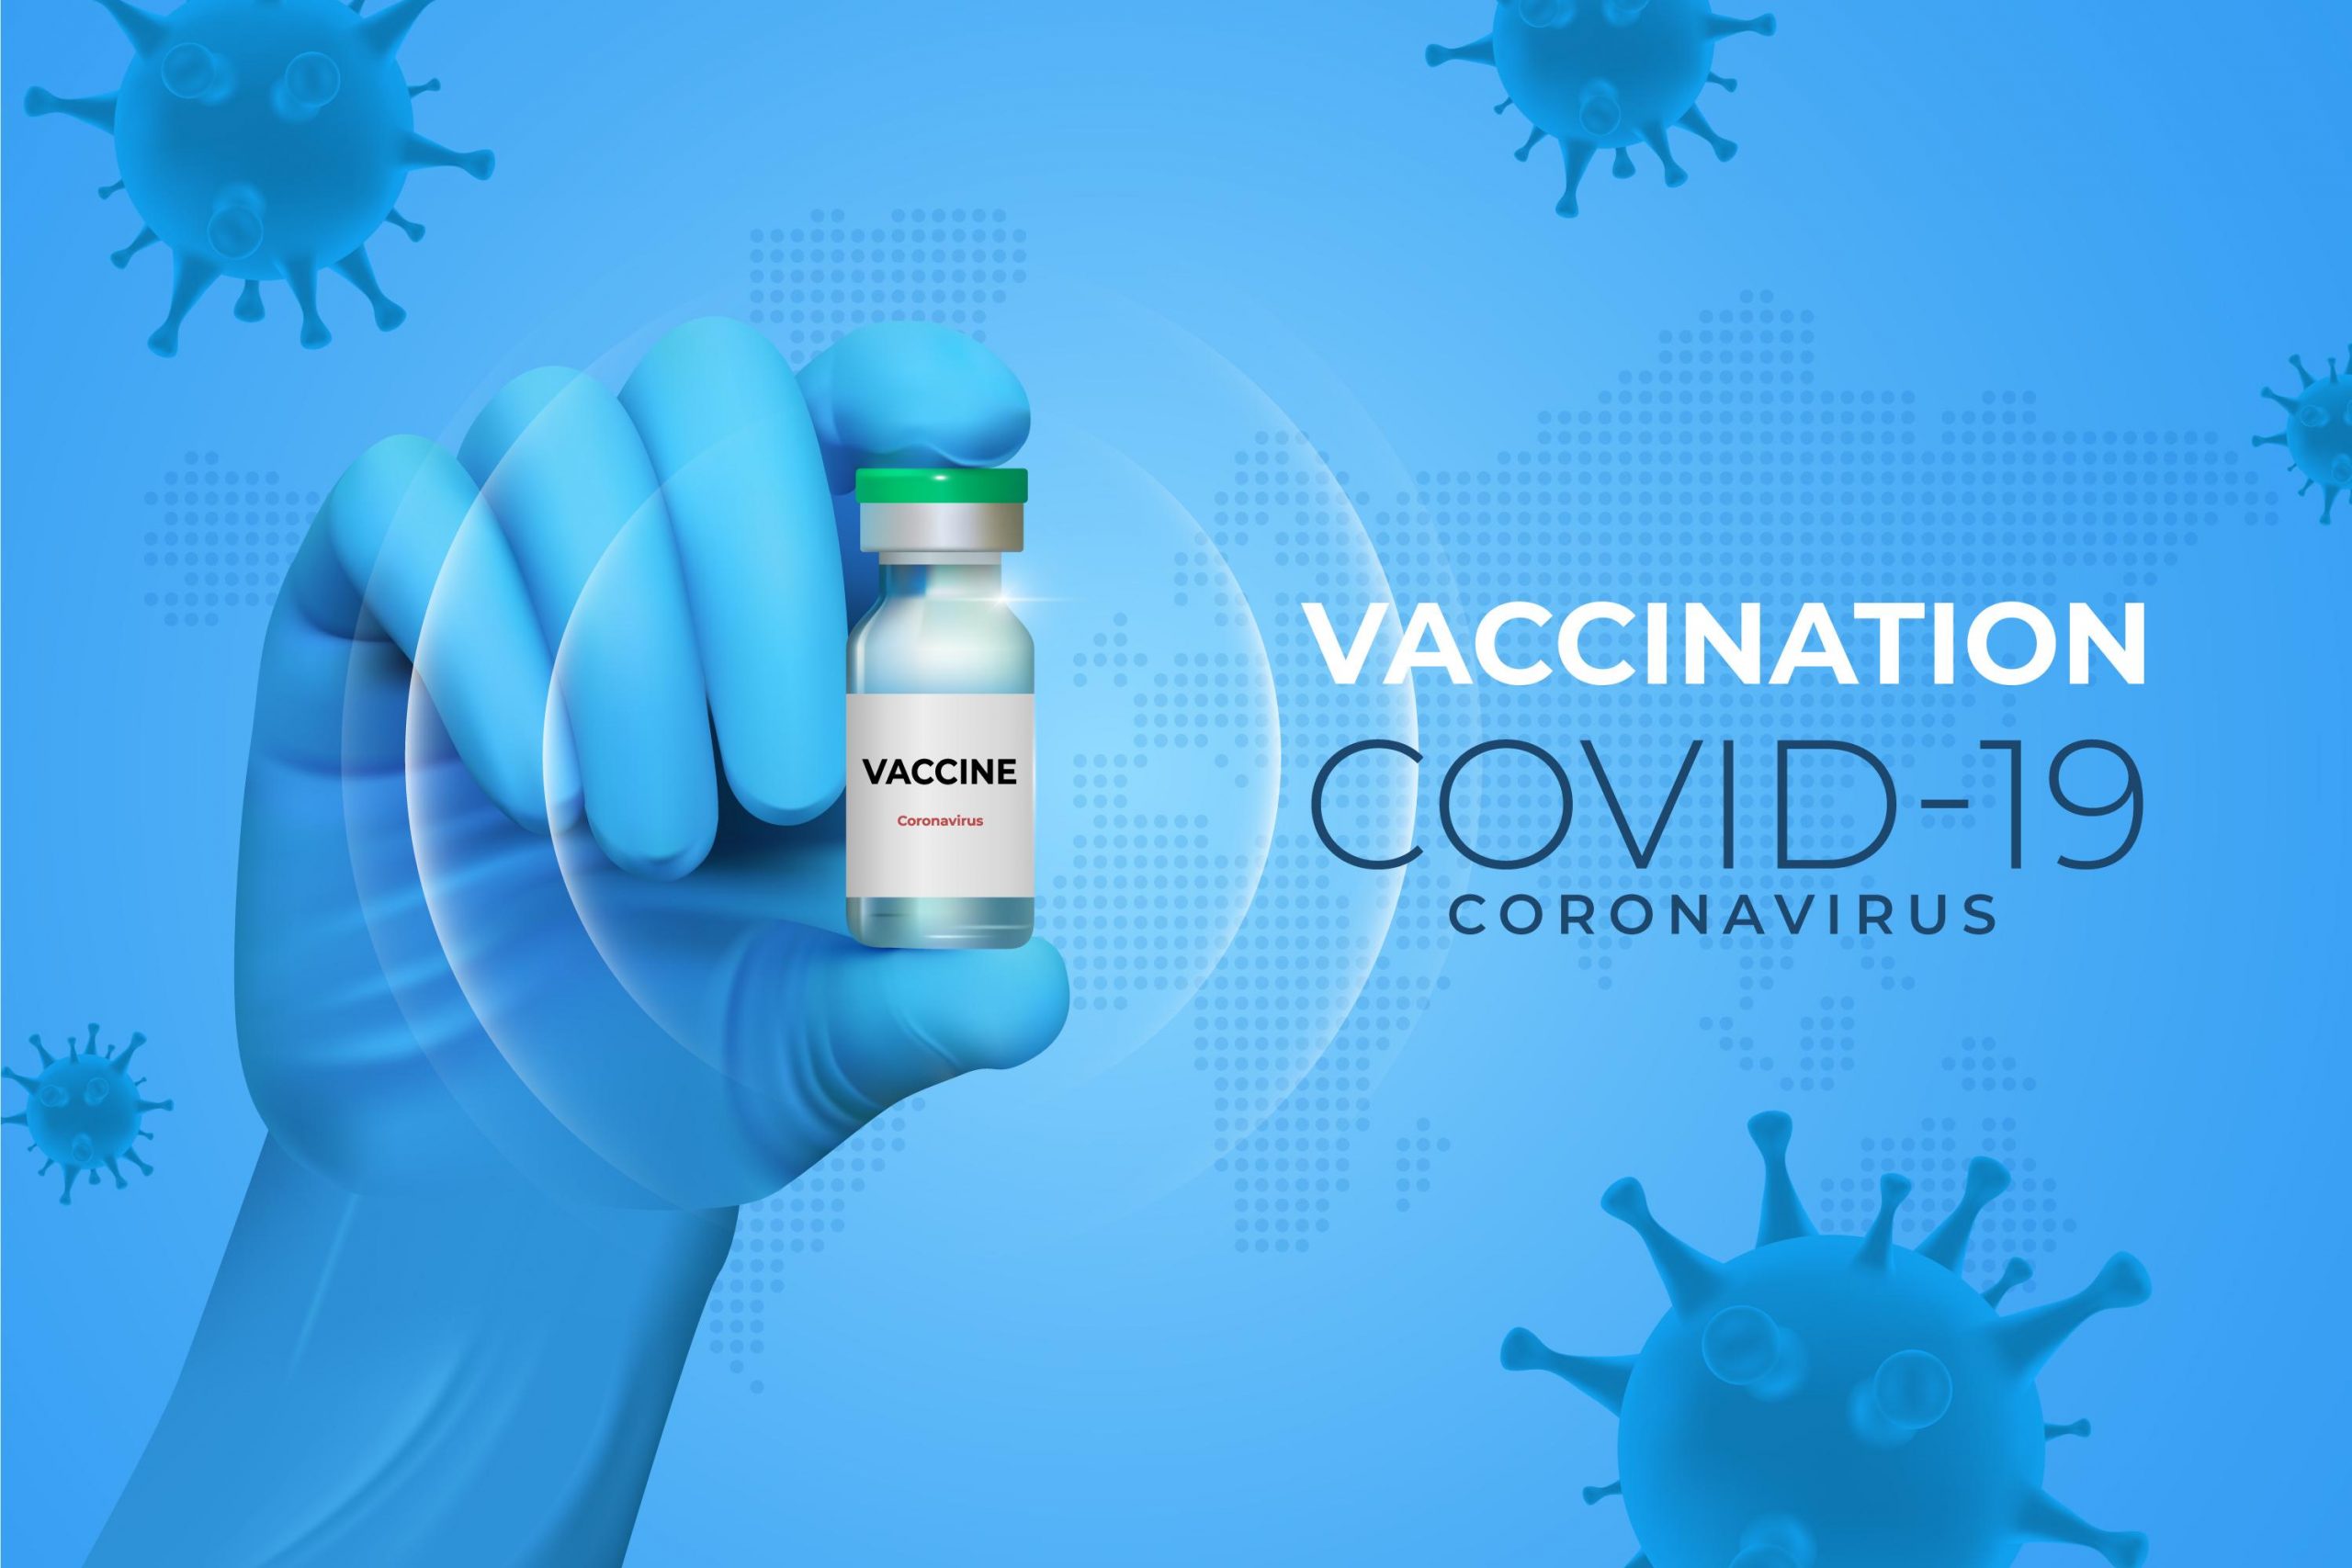 If Vaccinated People are still catching COVID-19, what’s the point of the Vaccine?